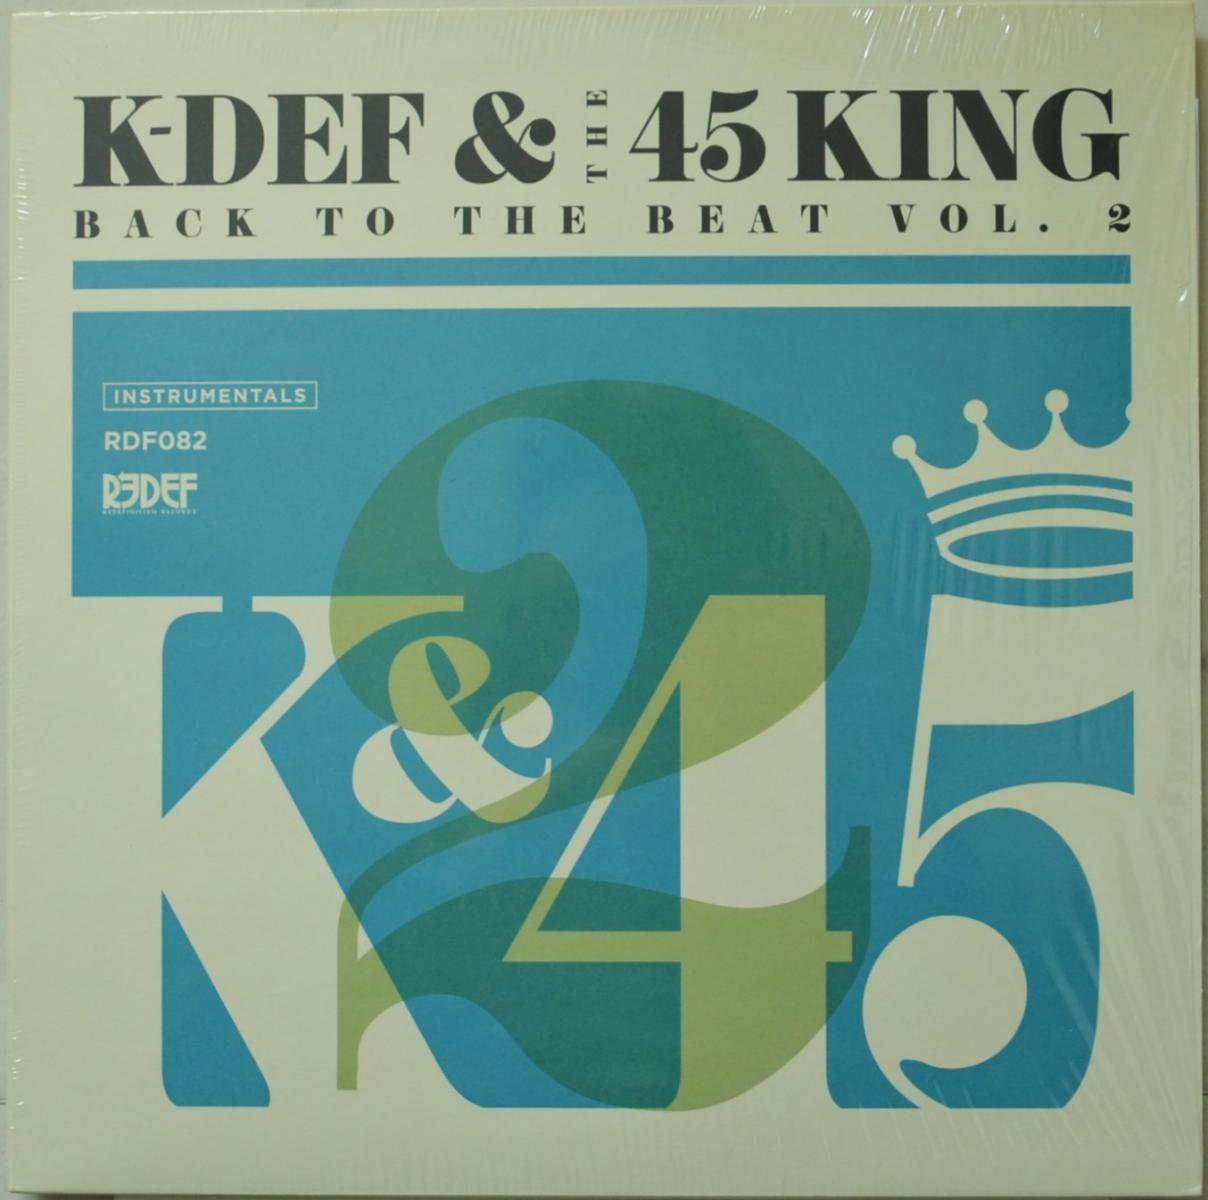 K-DEF & THE 45 KING / BACK TO THE BEAT VOL. 2 (1LP)